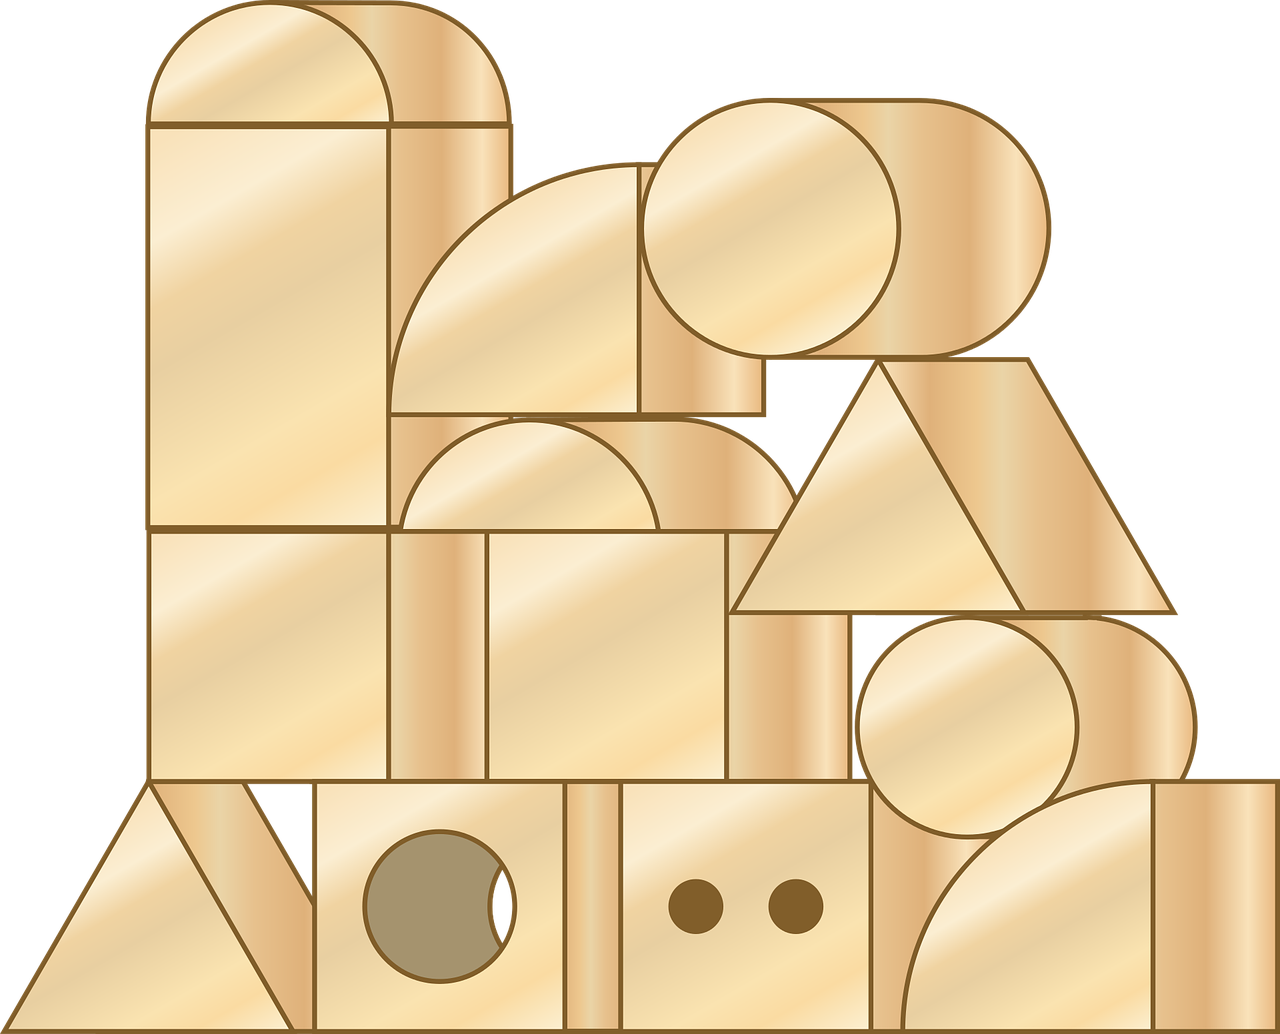 a group of geometric shapes on a black background, inspired by Louise Nevelson, cubism, clipart, gold metal, rounded architecture, building blocks